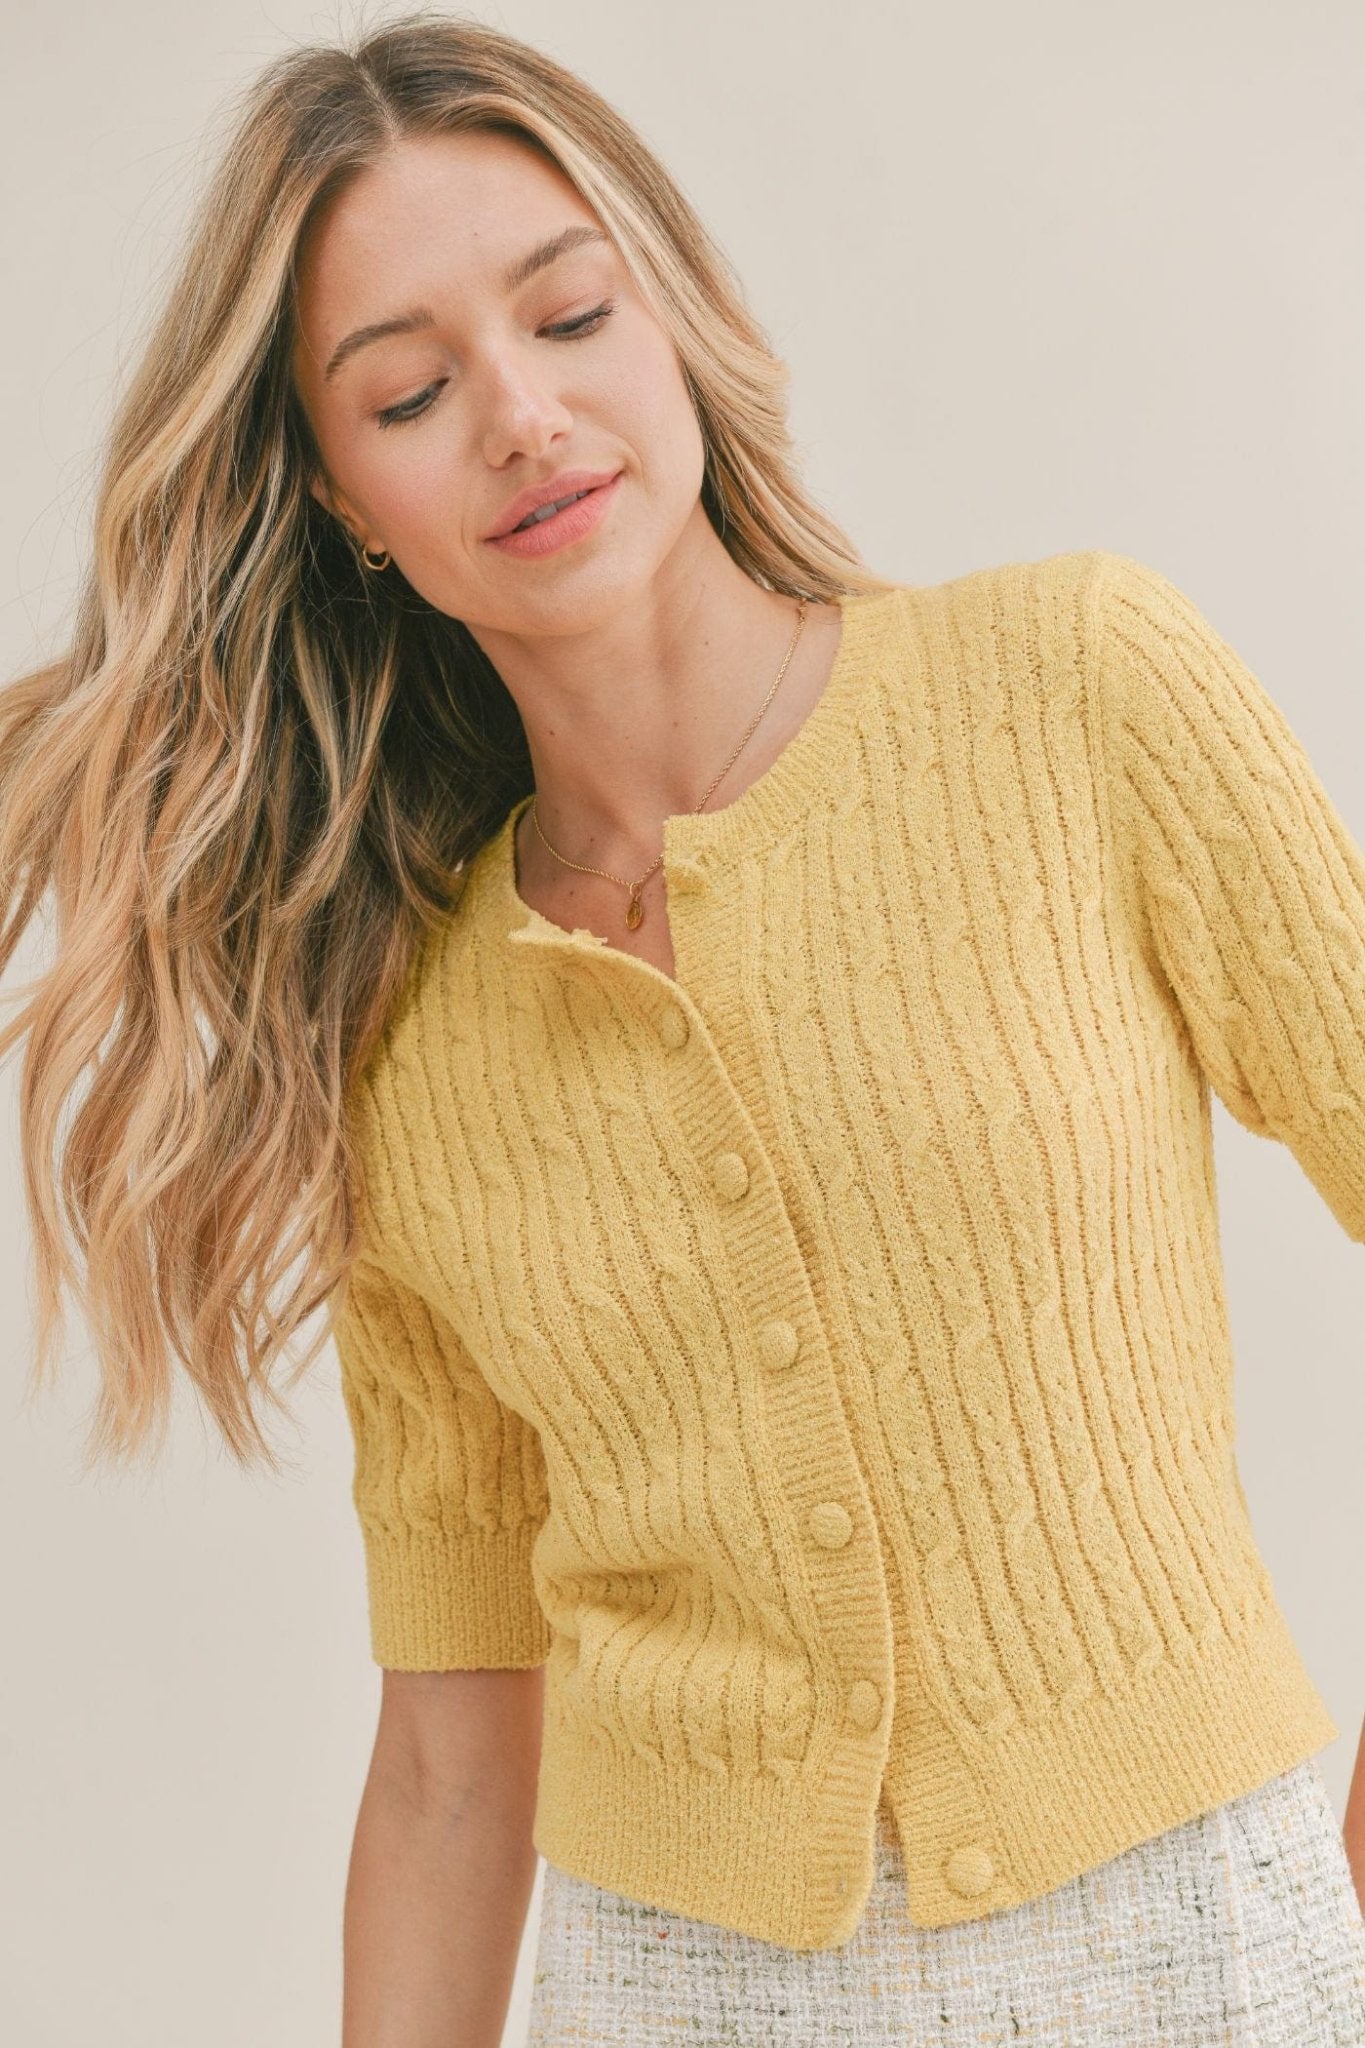 Fria Short Sleeve Cardigan Sweater in Banana by Sadie & Sage - Shirts & Tops - Blooming Daily